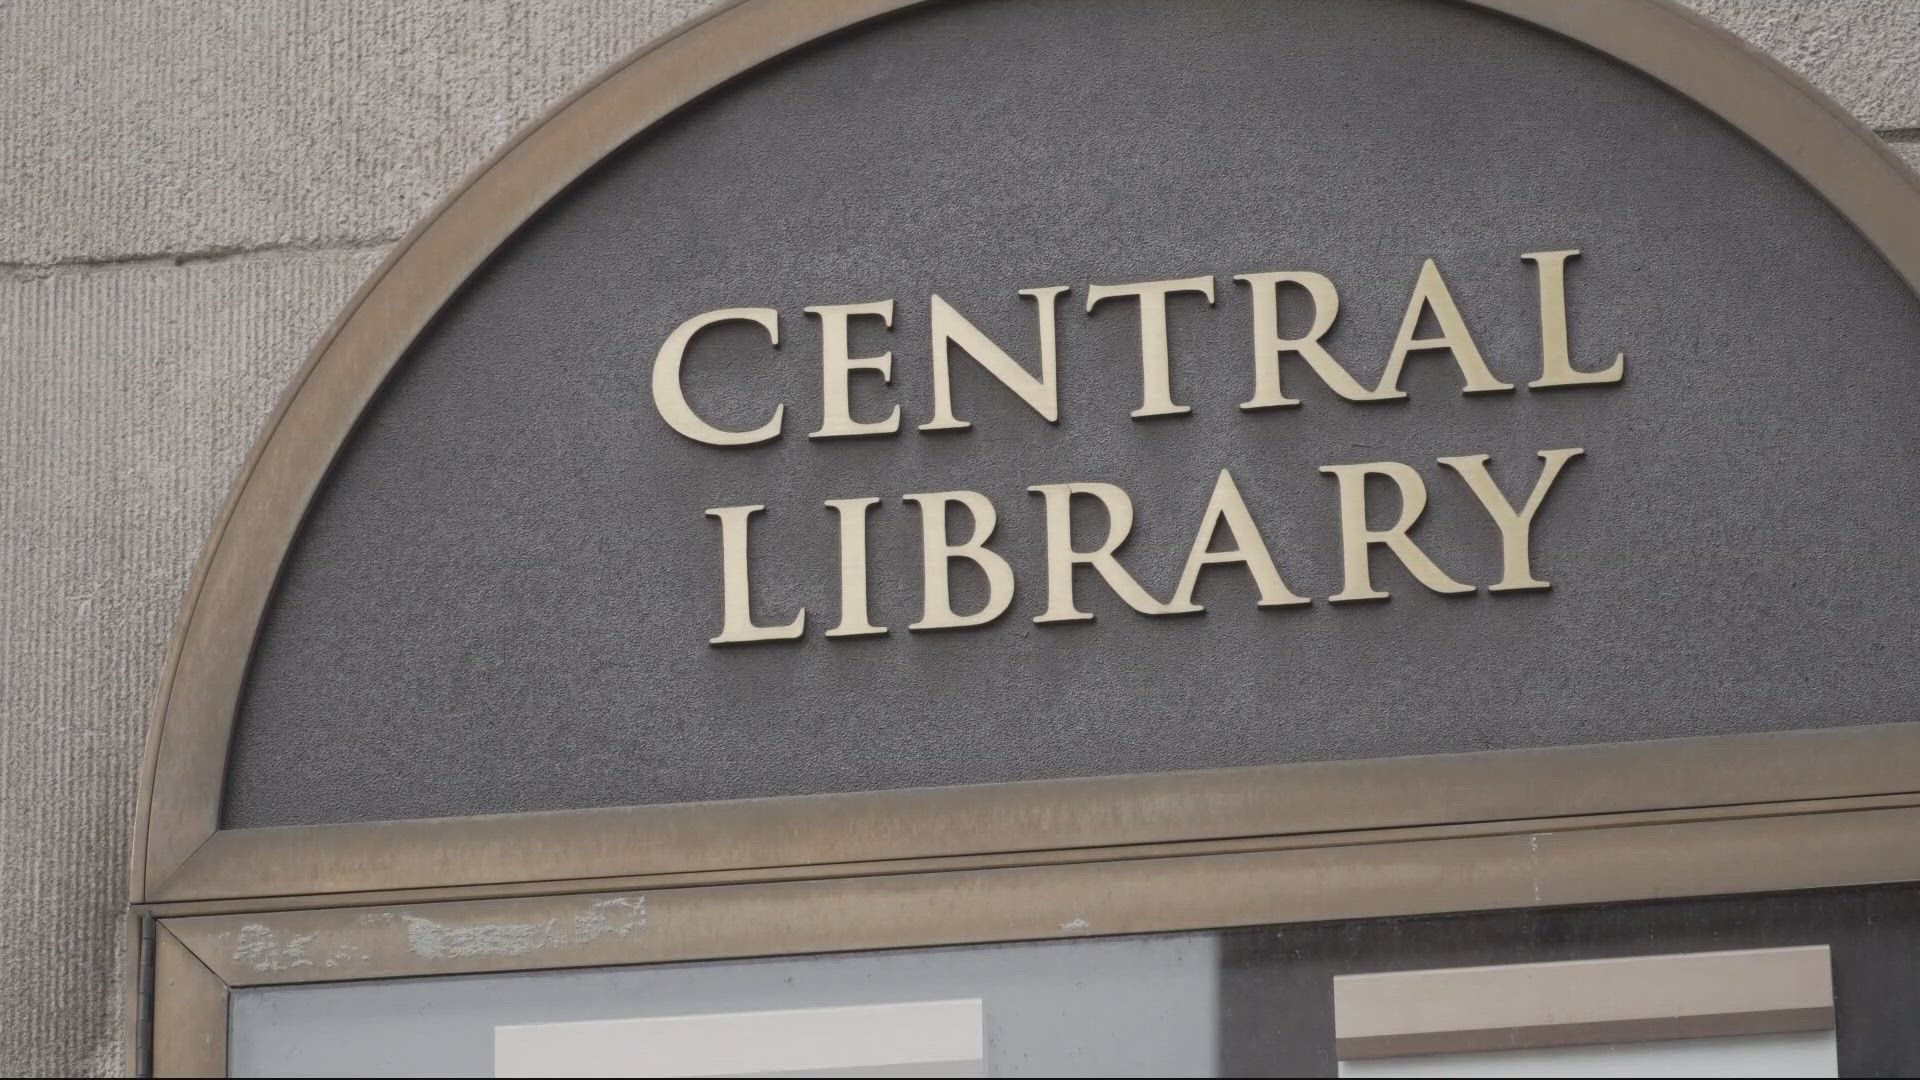 An audit reports the county libraries had the highest number of security incidents last year, and librarians are asking for help.